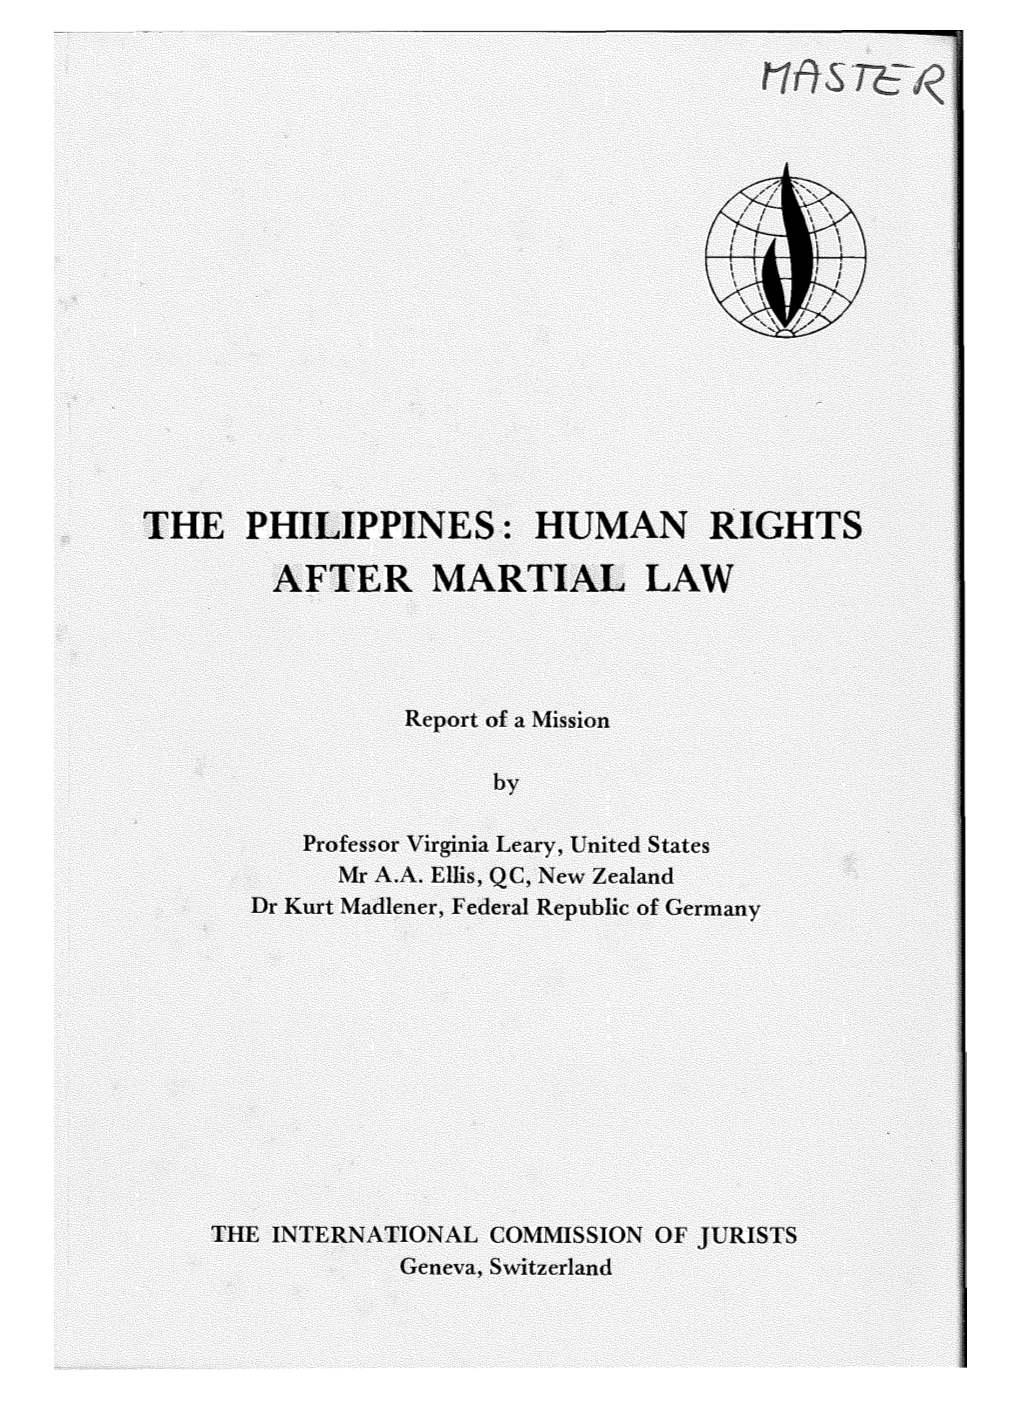 The Philippines: Human Rights After Martial Law